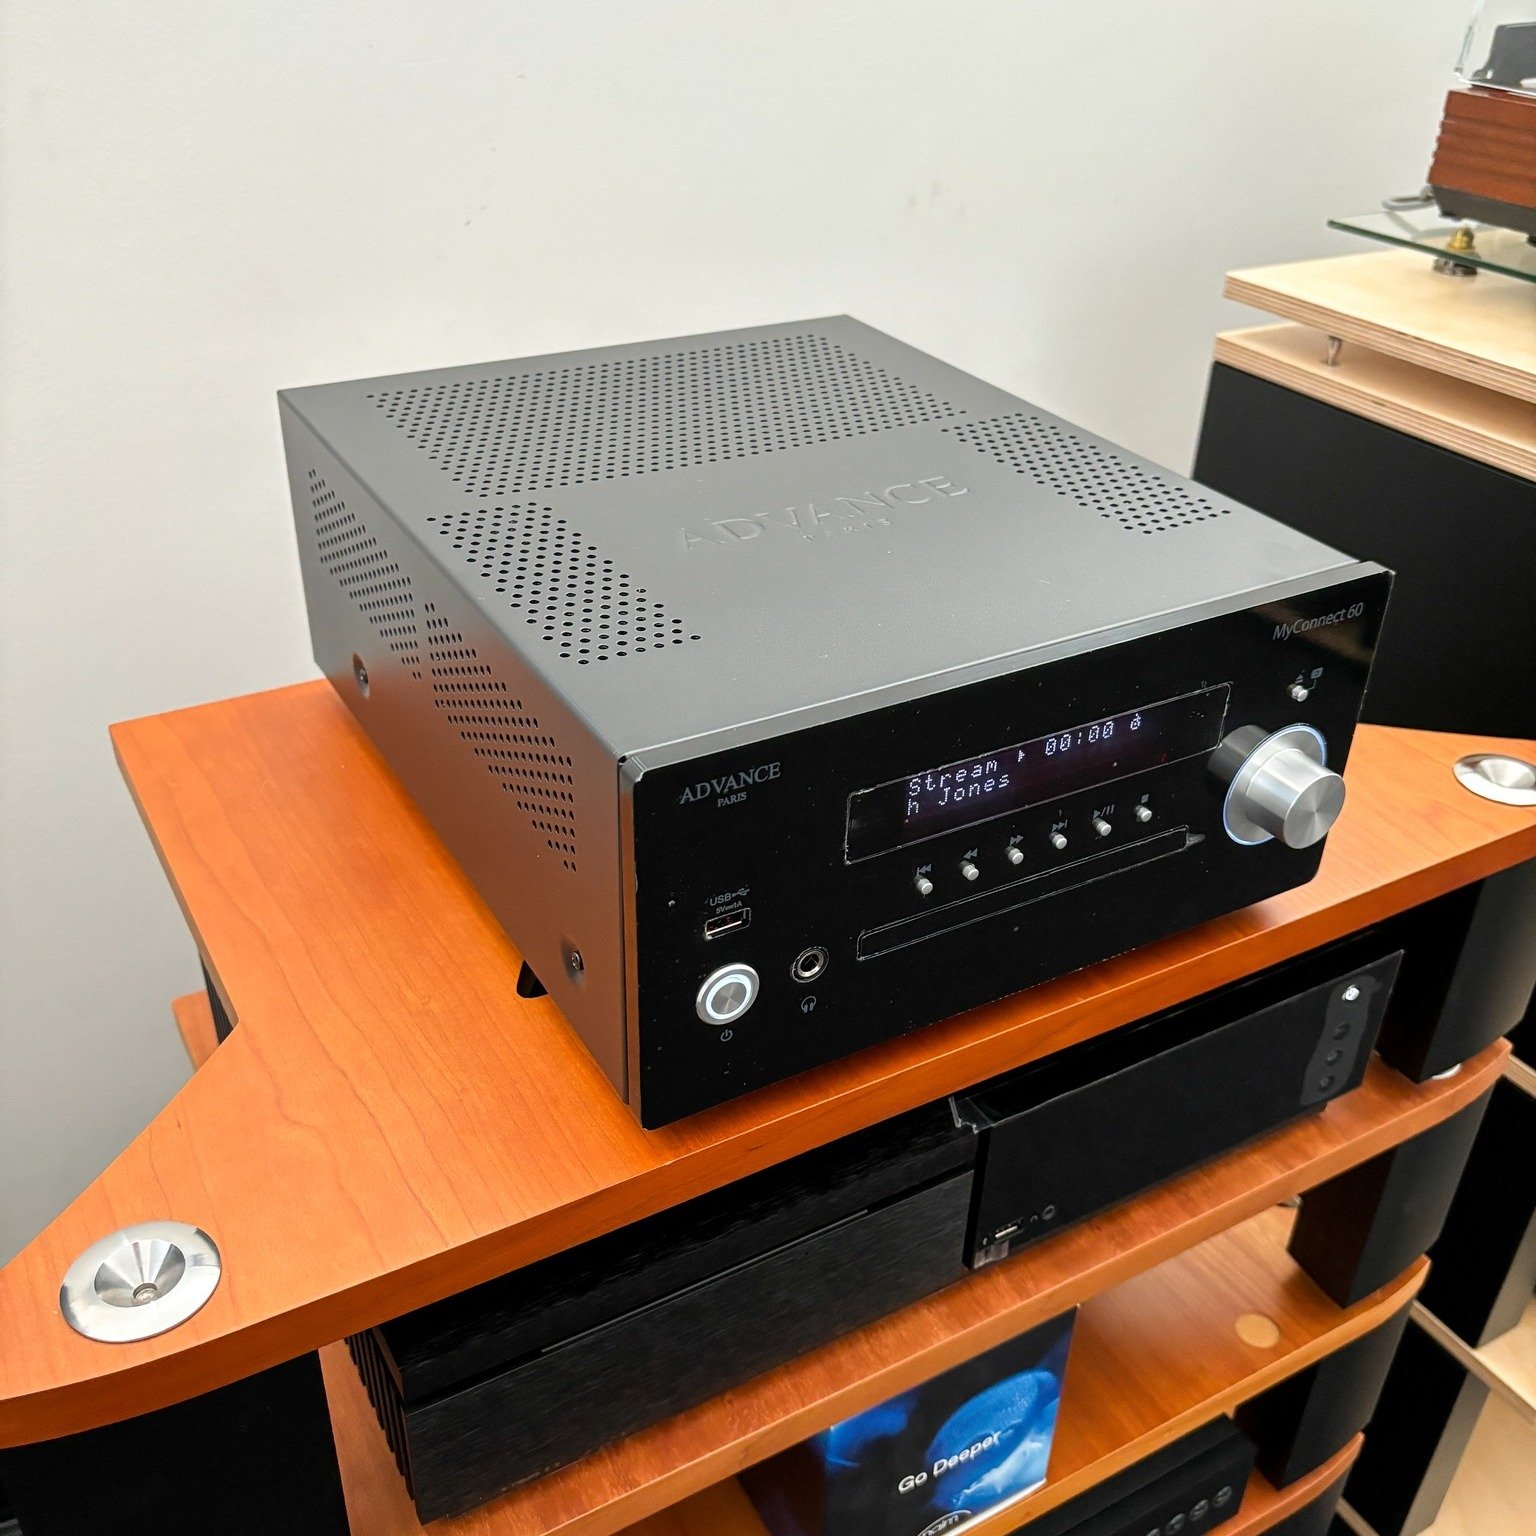 Once again showing off the @advanceparis MyConnect 60 - an all-in-one home audio system - just add speakers to enjoy music streaming, CDs, internet radio, Airplay, and more.

#audiogenesis #hifi #audiophile #homeaudio #advanceparis